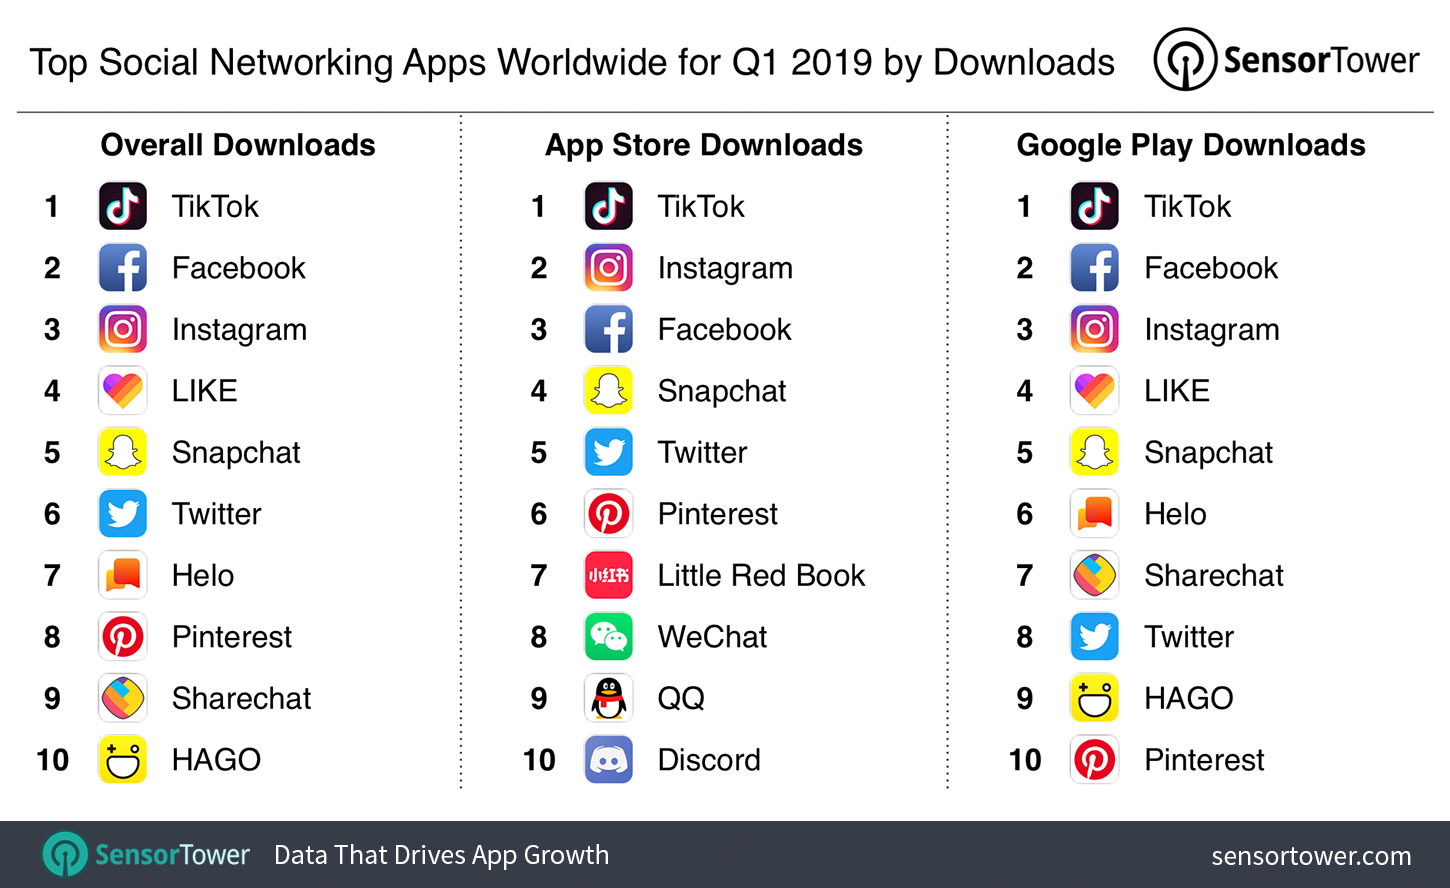 Top Social Networking Apps Worldwide for Q1 2019 by Downloads